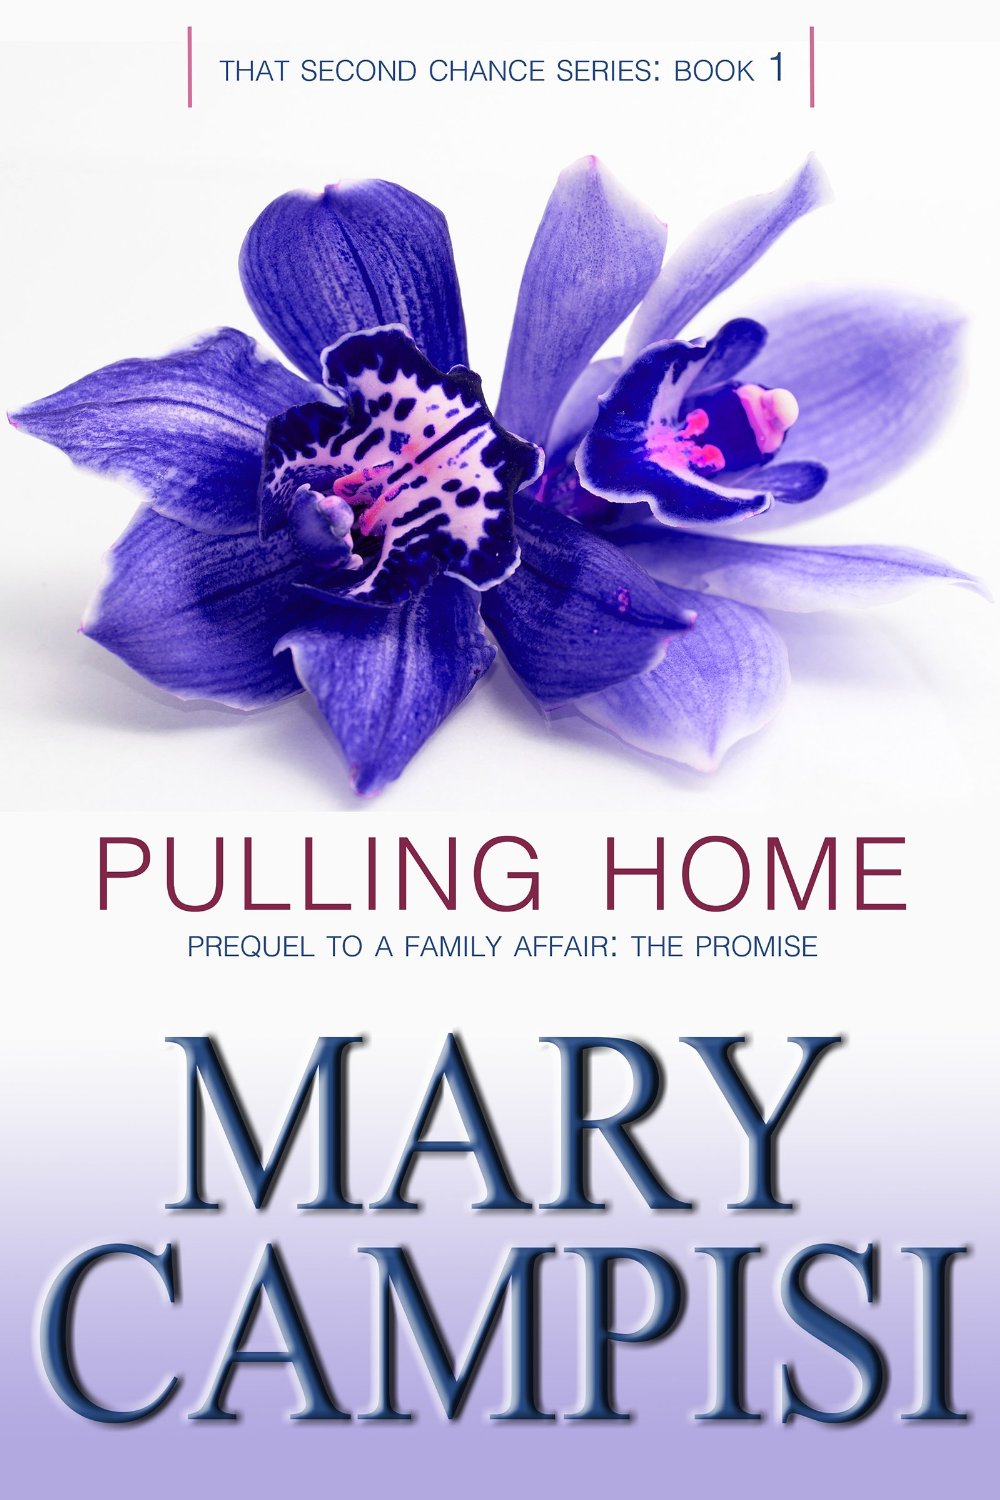 Pulling Home: That Second Chance, Book 1 by Mary Campisi